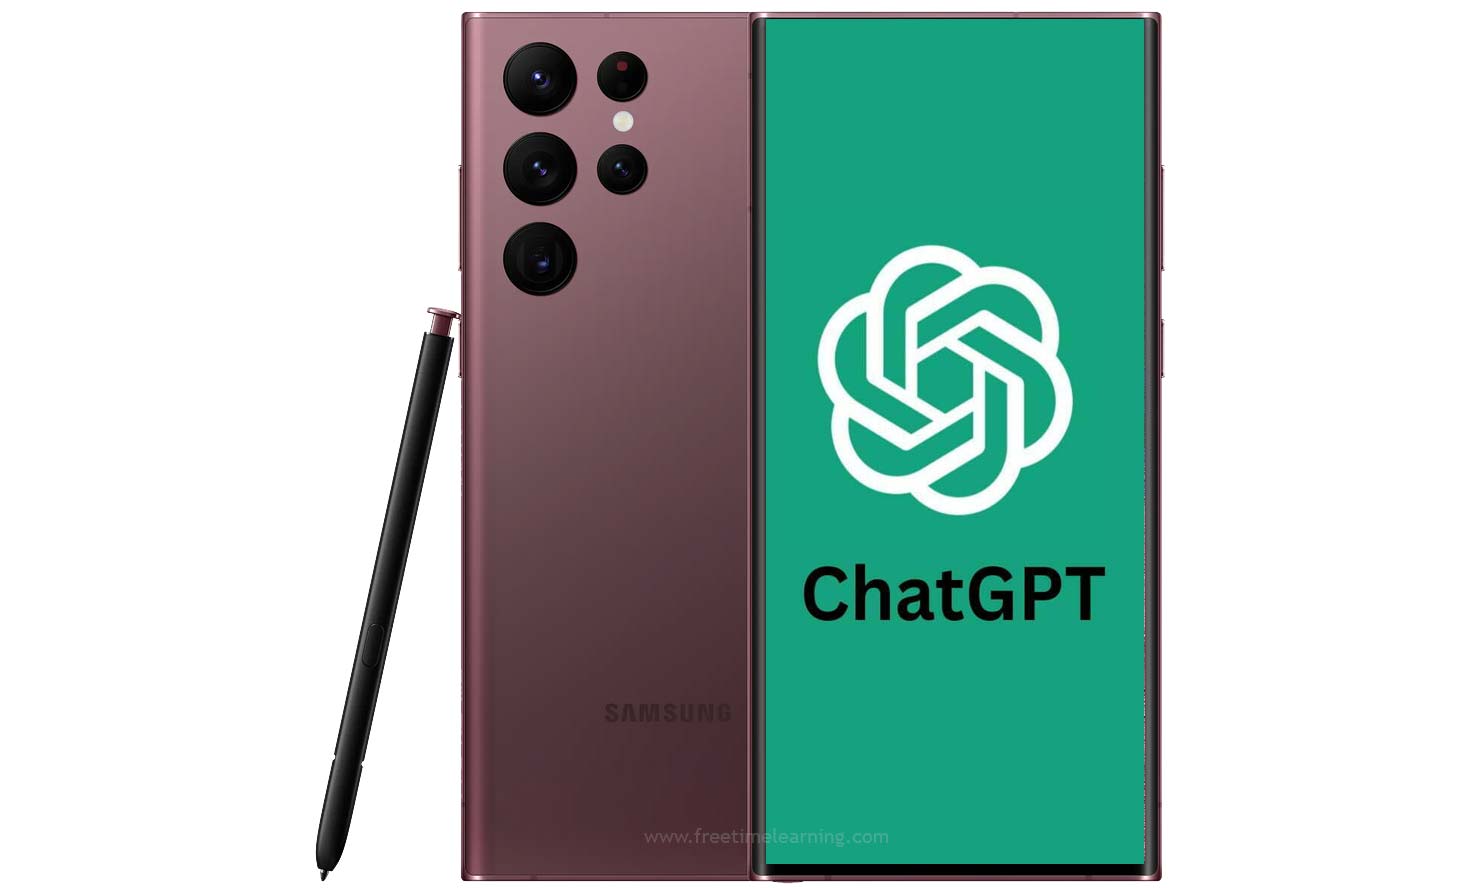 Samsung may soon bring ChatGPT to its smartphones via the browser